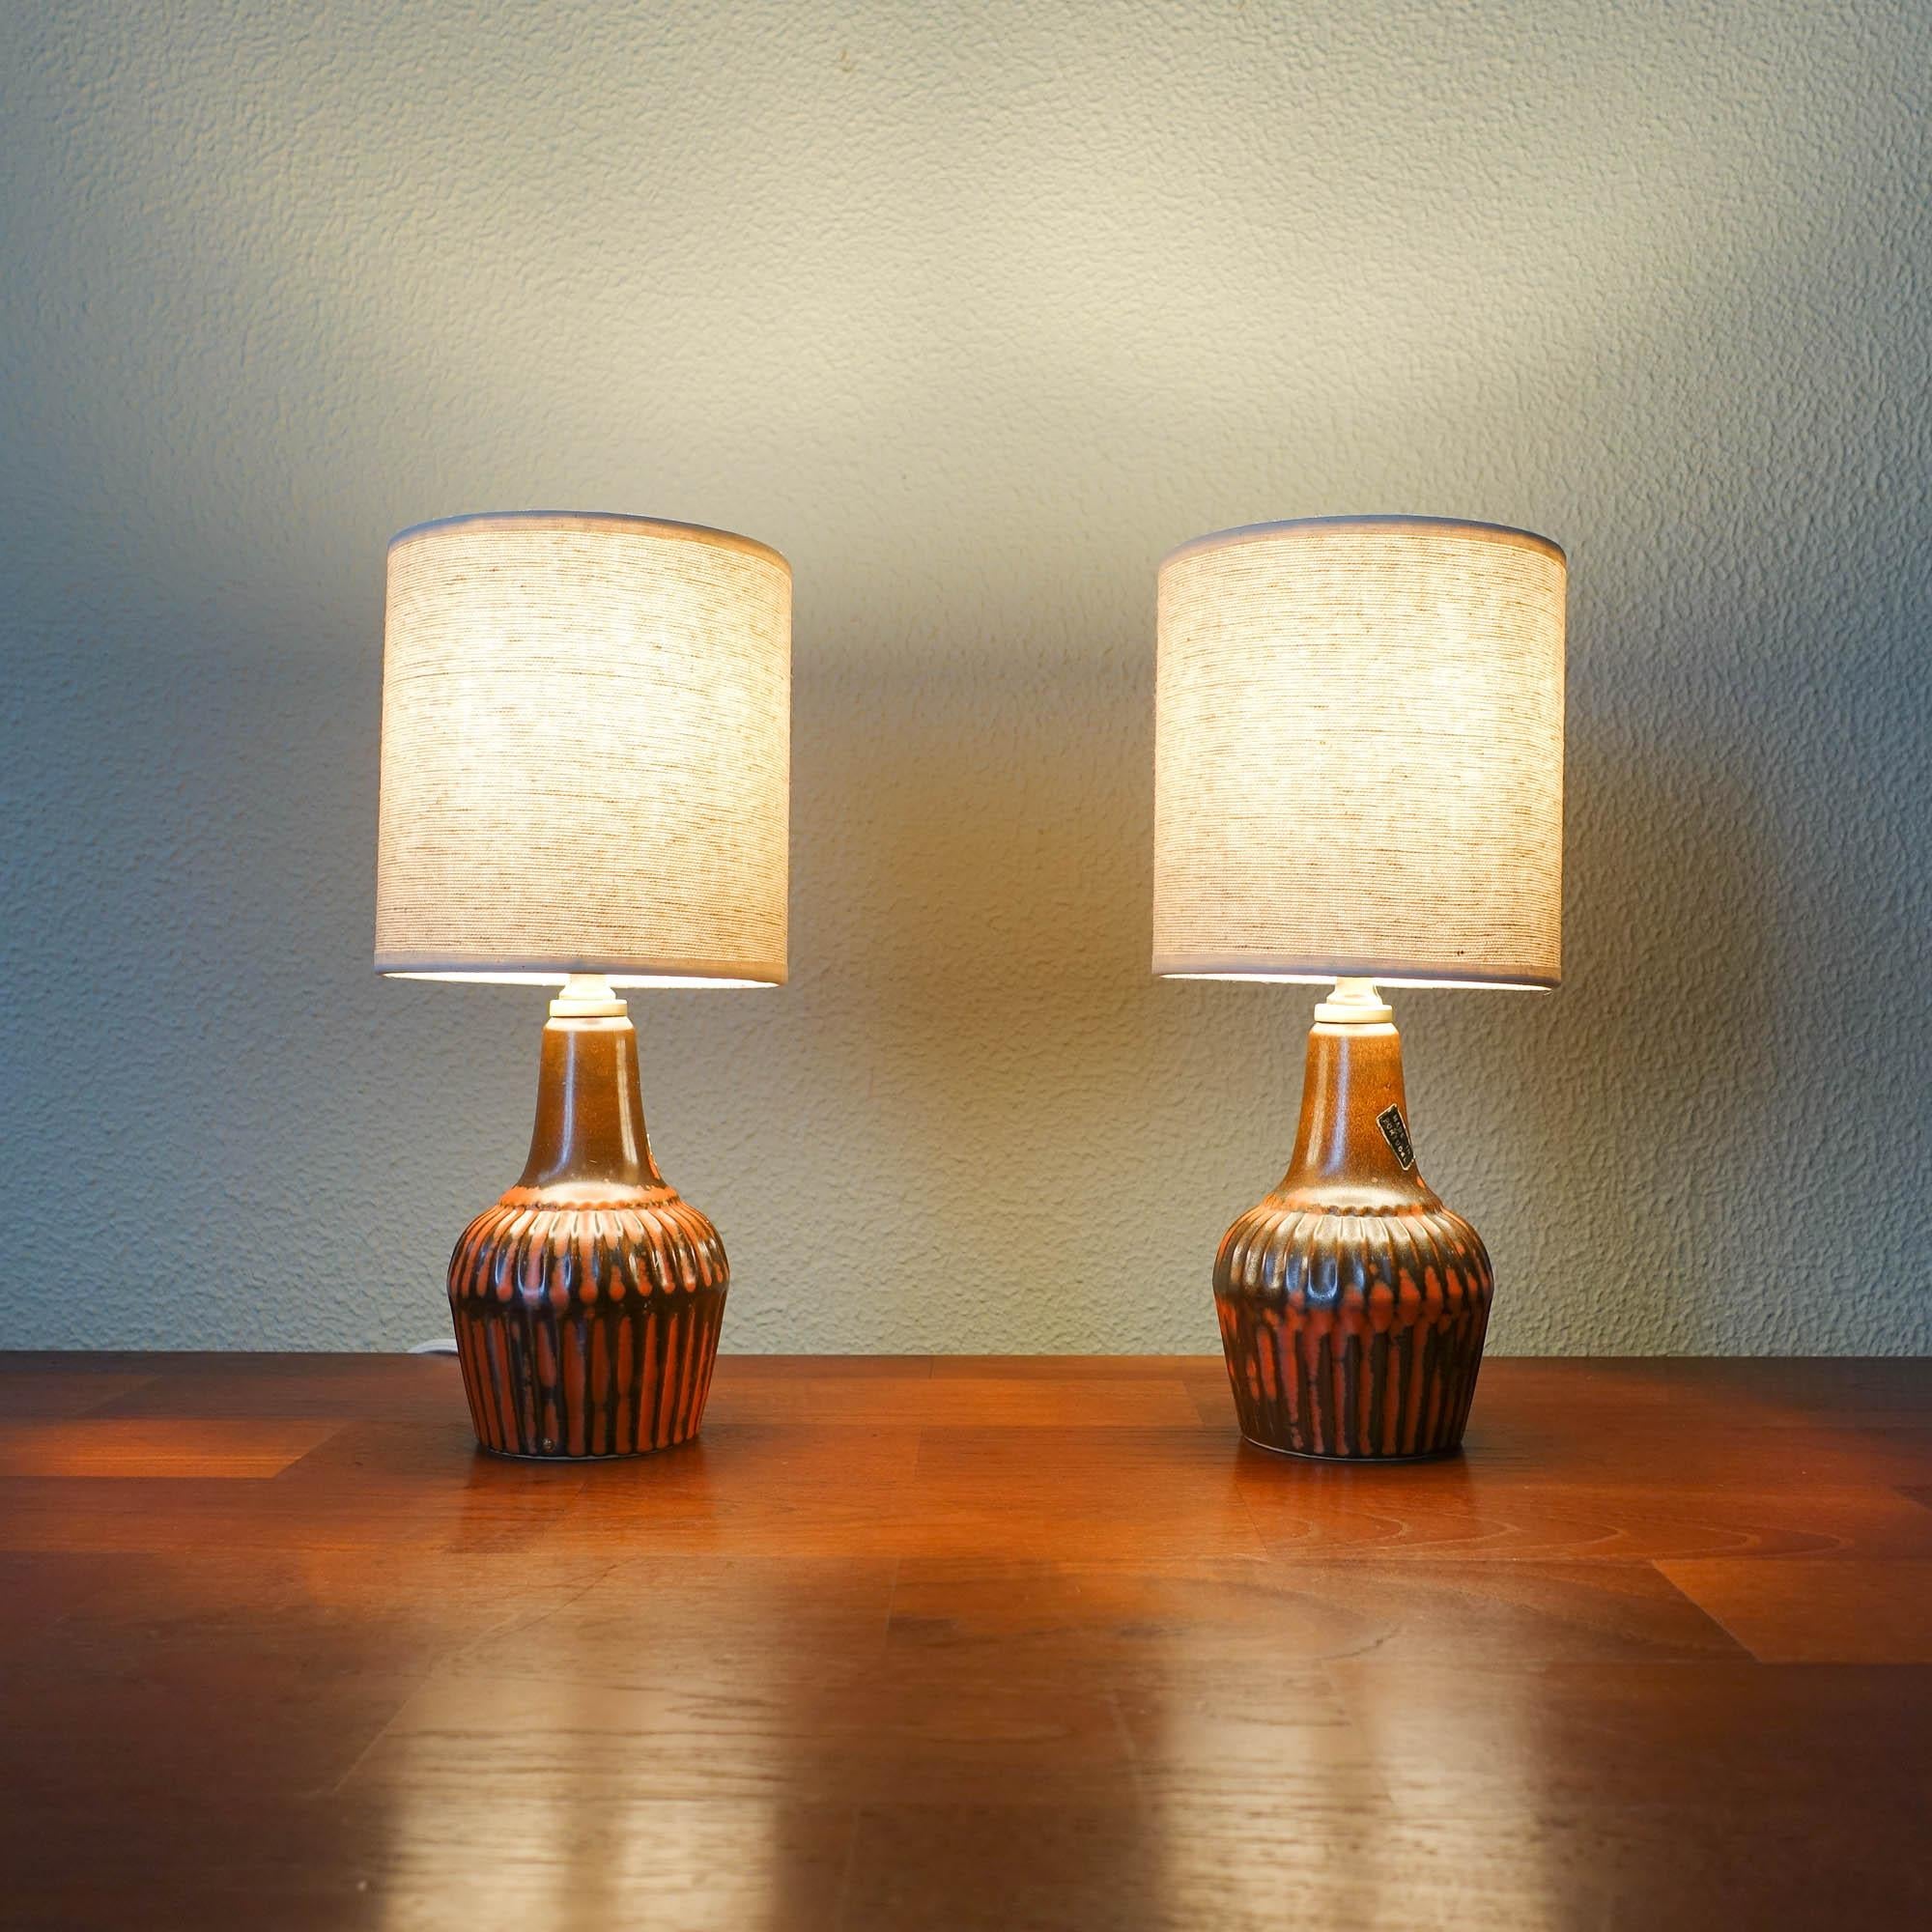 Portuguese Pair of Brown and Orange Ceramic Table Lamps by Secla, 1960s For Sale